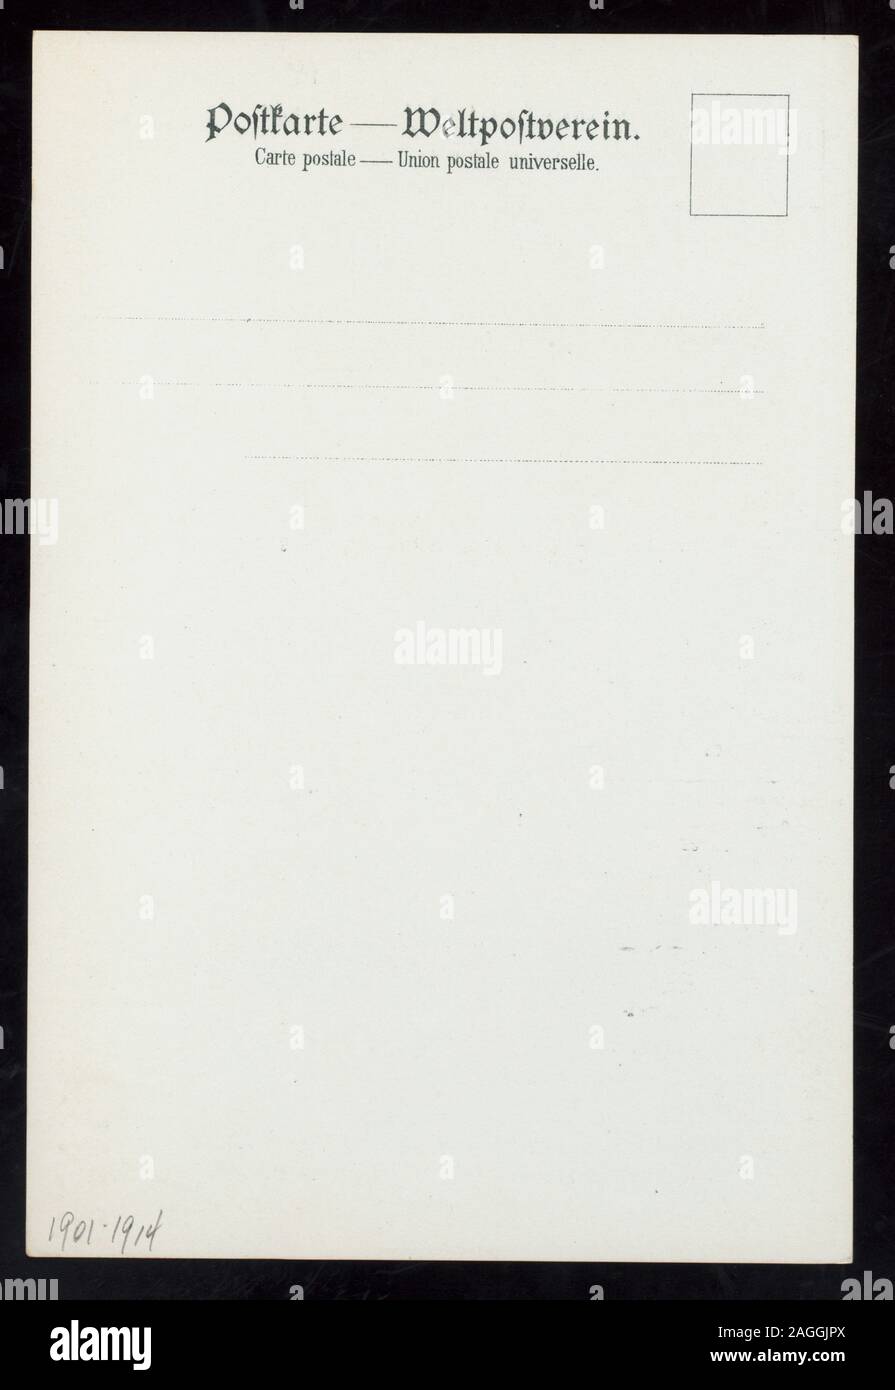 SHIPS IN HARBOR; MENUS SEPARATE IN GERMAN AND ENGLISH; MAY BE USED AS POSTCARD Citation/Reference: 1901-1914; LUNCH [held by] NORDDEUTSCHER LLOYD BREMEN [at] SS FRIEDRICH DER GROSSE (SS;) Stock Photo